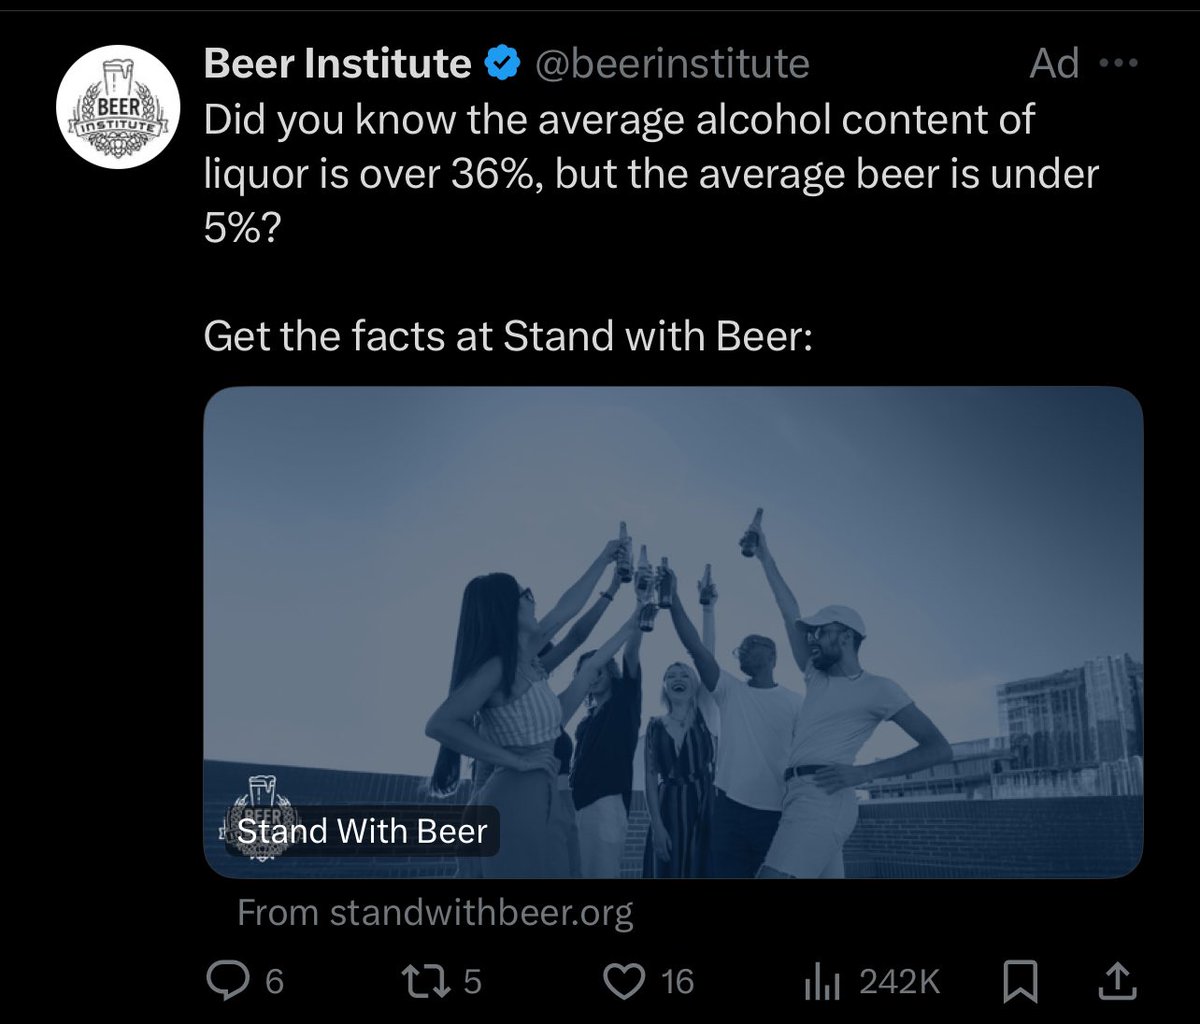 Not sure that’s a selling point, Beer Institute. Hire me, I will 10X your engagement overnight.